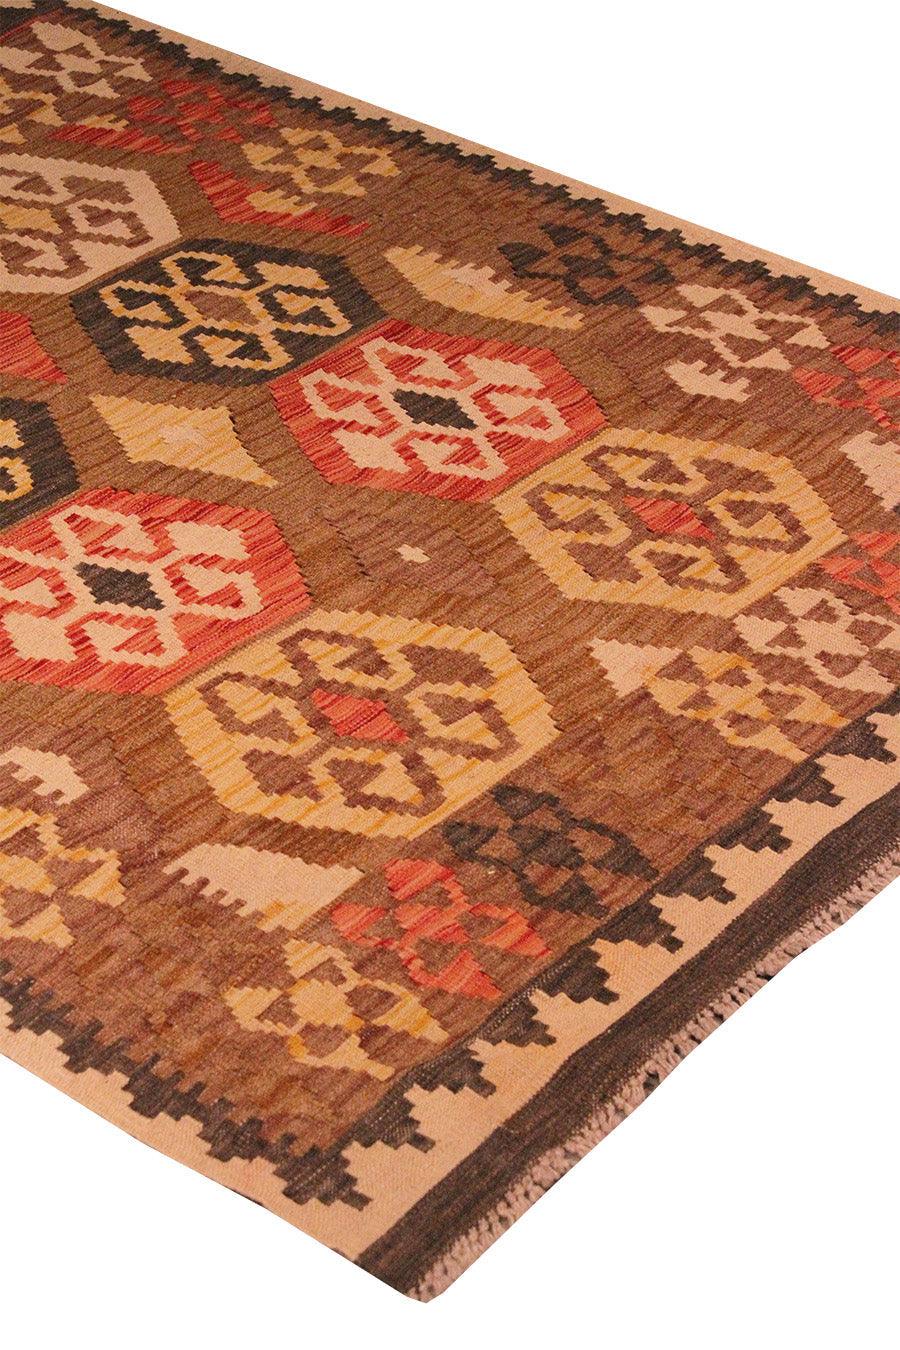 Canvello Kilim Hand-Woven Wool Area Rug- 3'7" X 4'9"